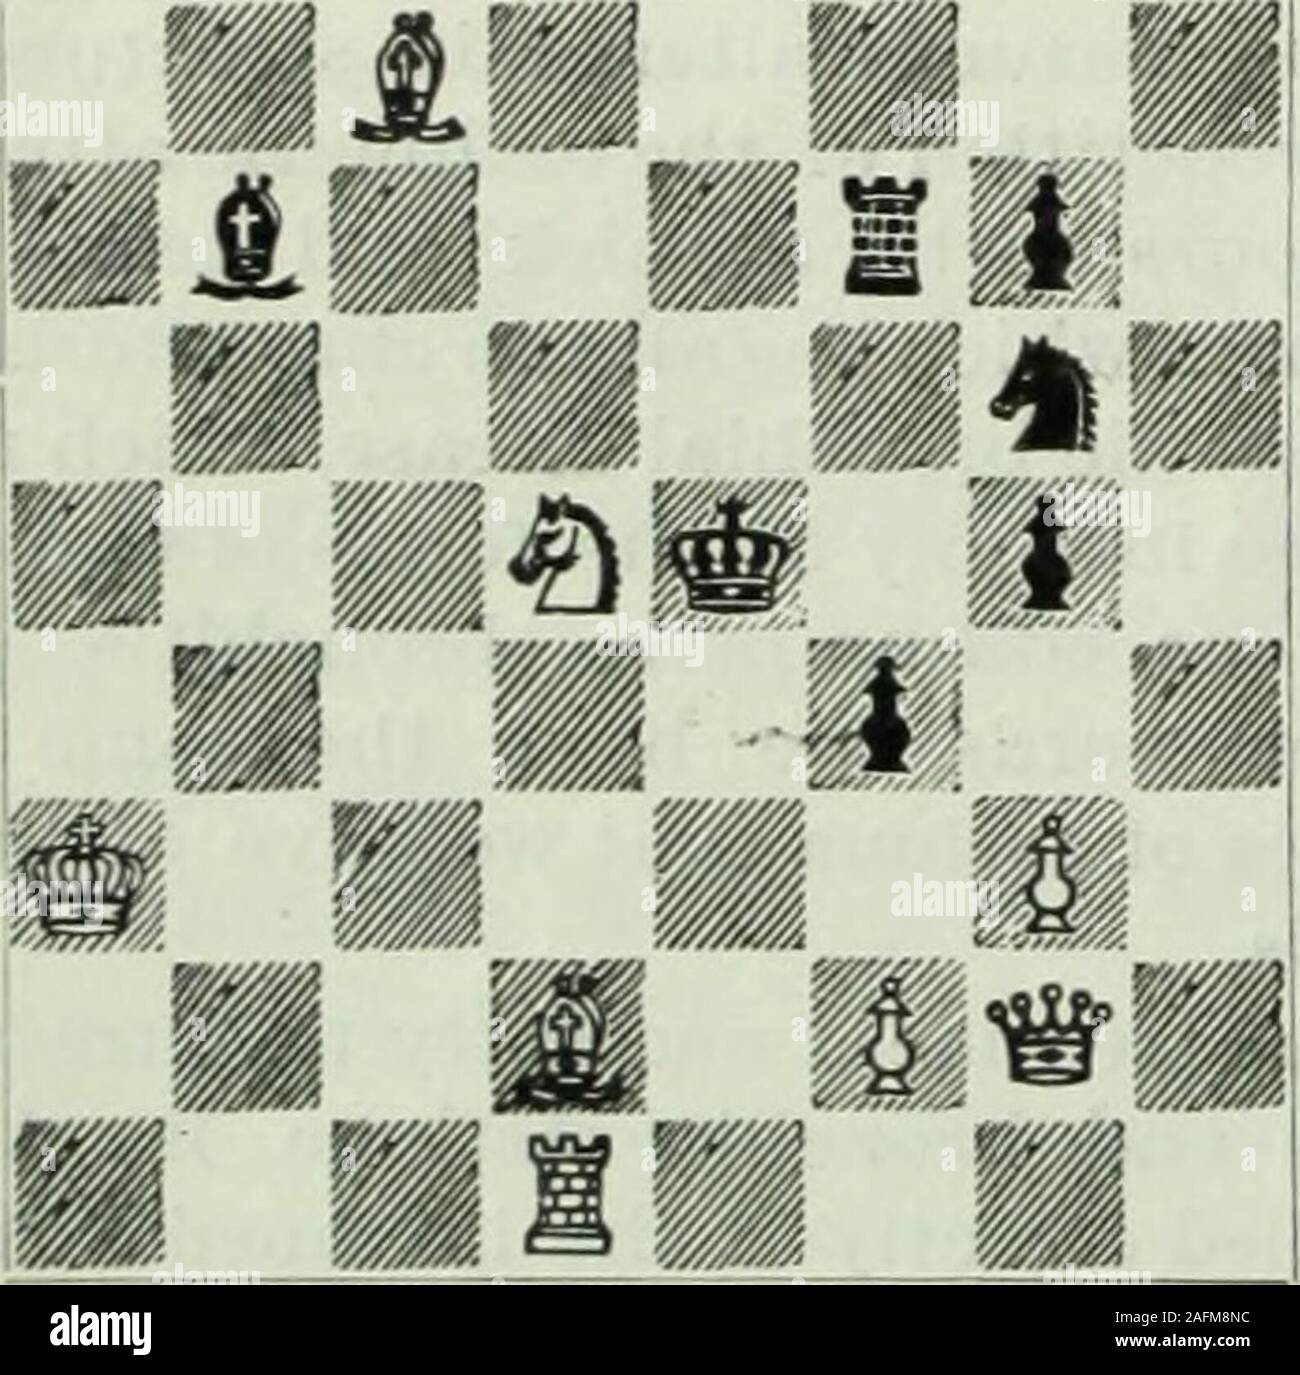 The Literary Digest White Twelve Pieces White Mates In Two Moves Is I No 250 Composed For The Literary Digest And Dedi Cated To A H Robbins St Louis Bv Dr W R I Dalton New